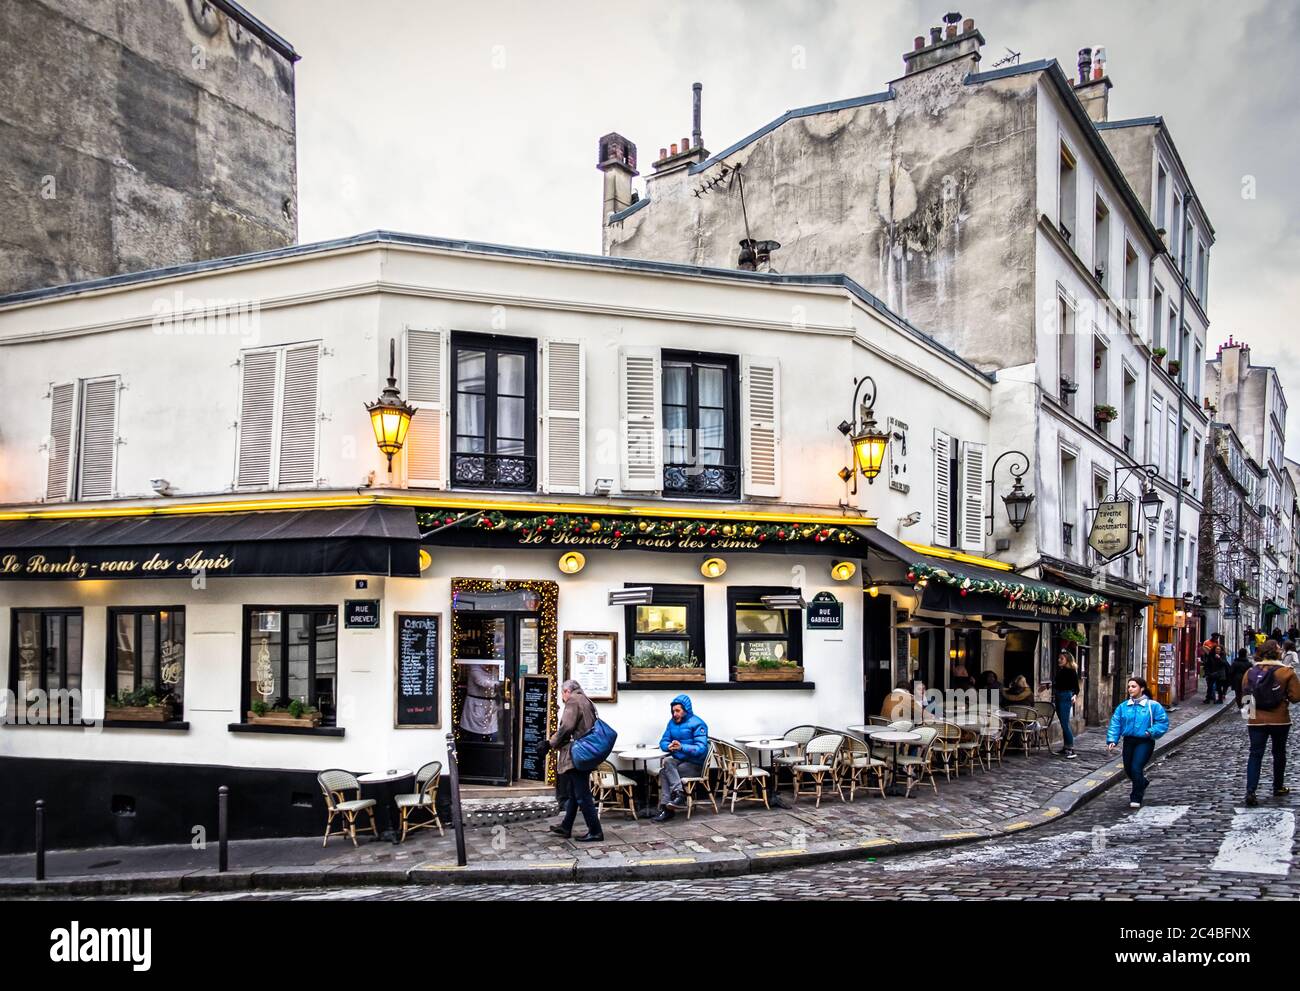 La Porte Montmartre is the legendary and famous brasserie located on Grands  Boulevards in Paris, France Stock Photo - Alamy